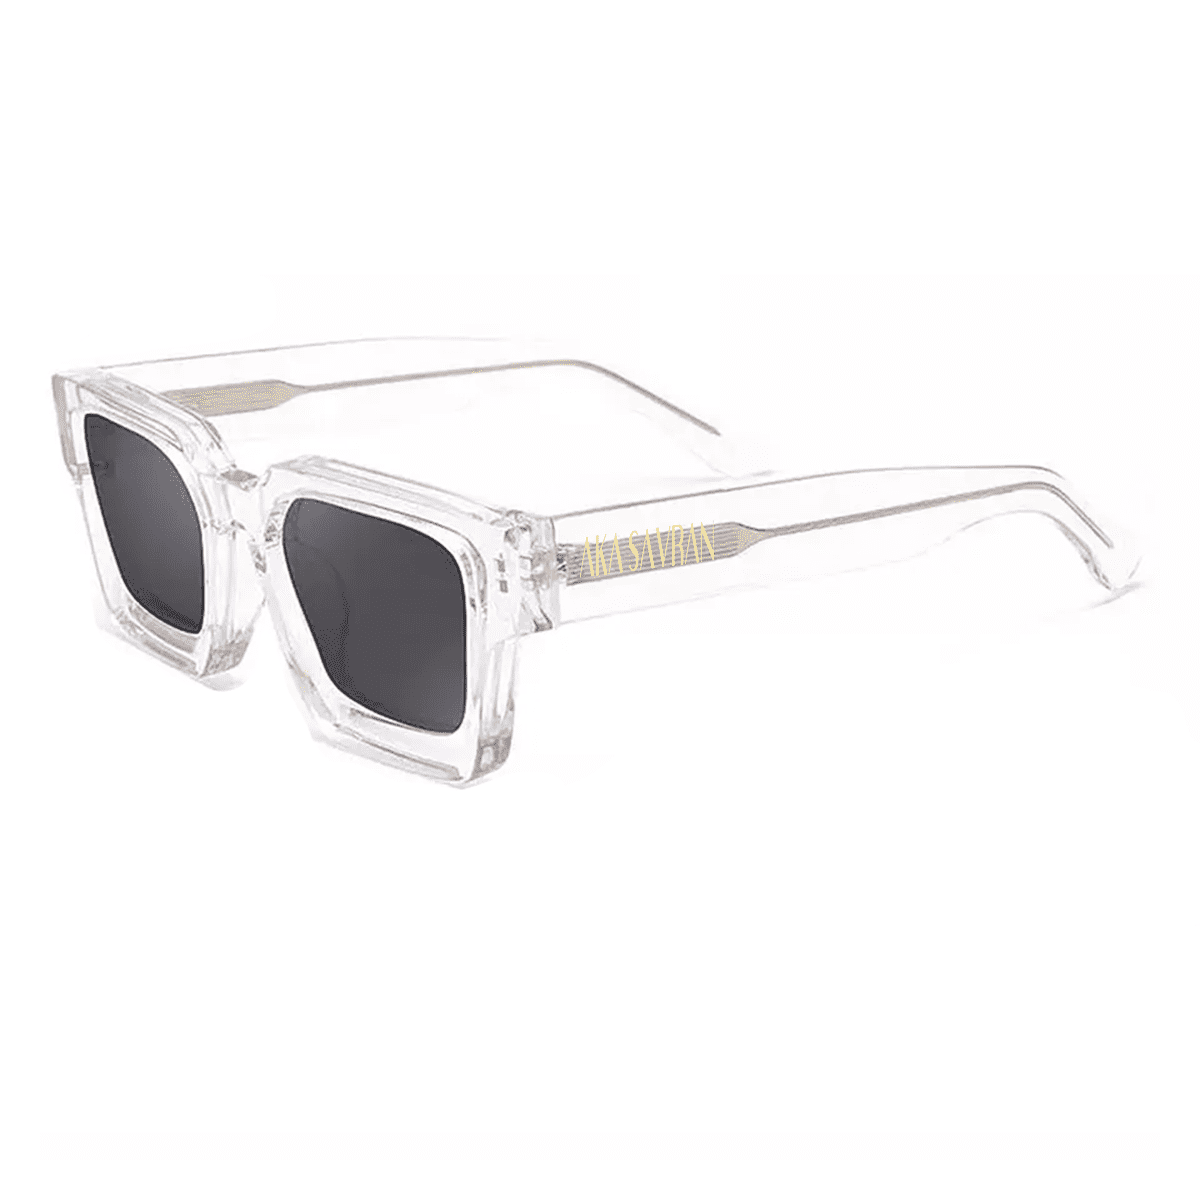 Rebel Transparent, luxurious square sunglasses by AKA SAVRAN, inspired by Virgil Abloh and made out of acetate